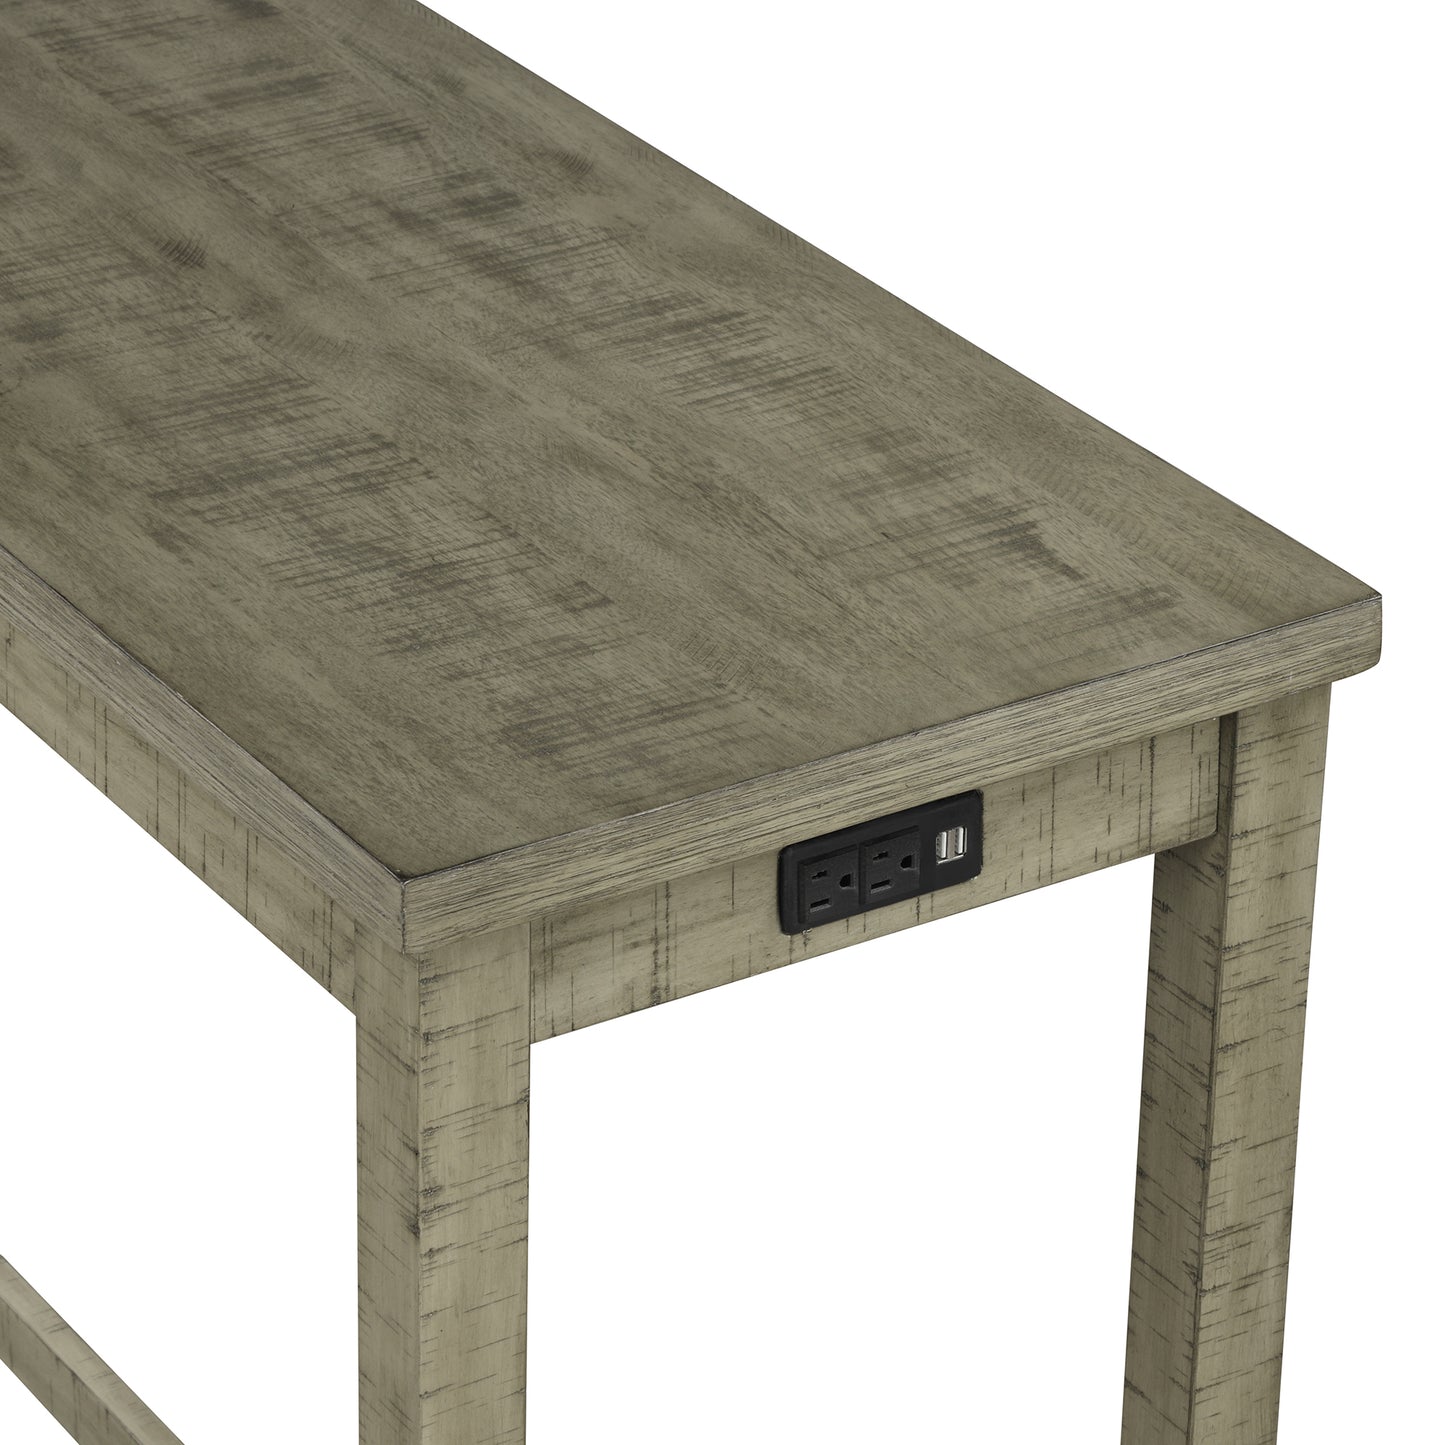 4 Piece Counter Height Table with Fabric Padded Stools